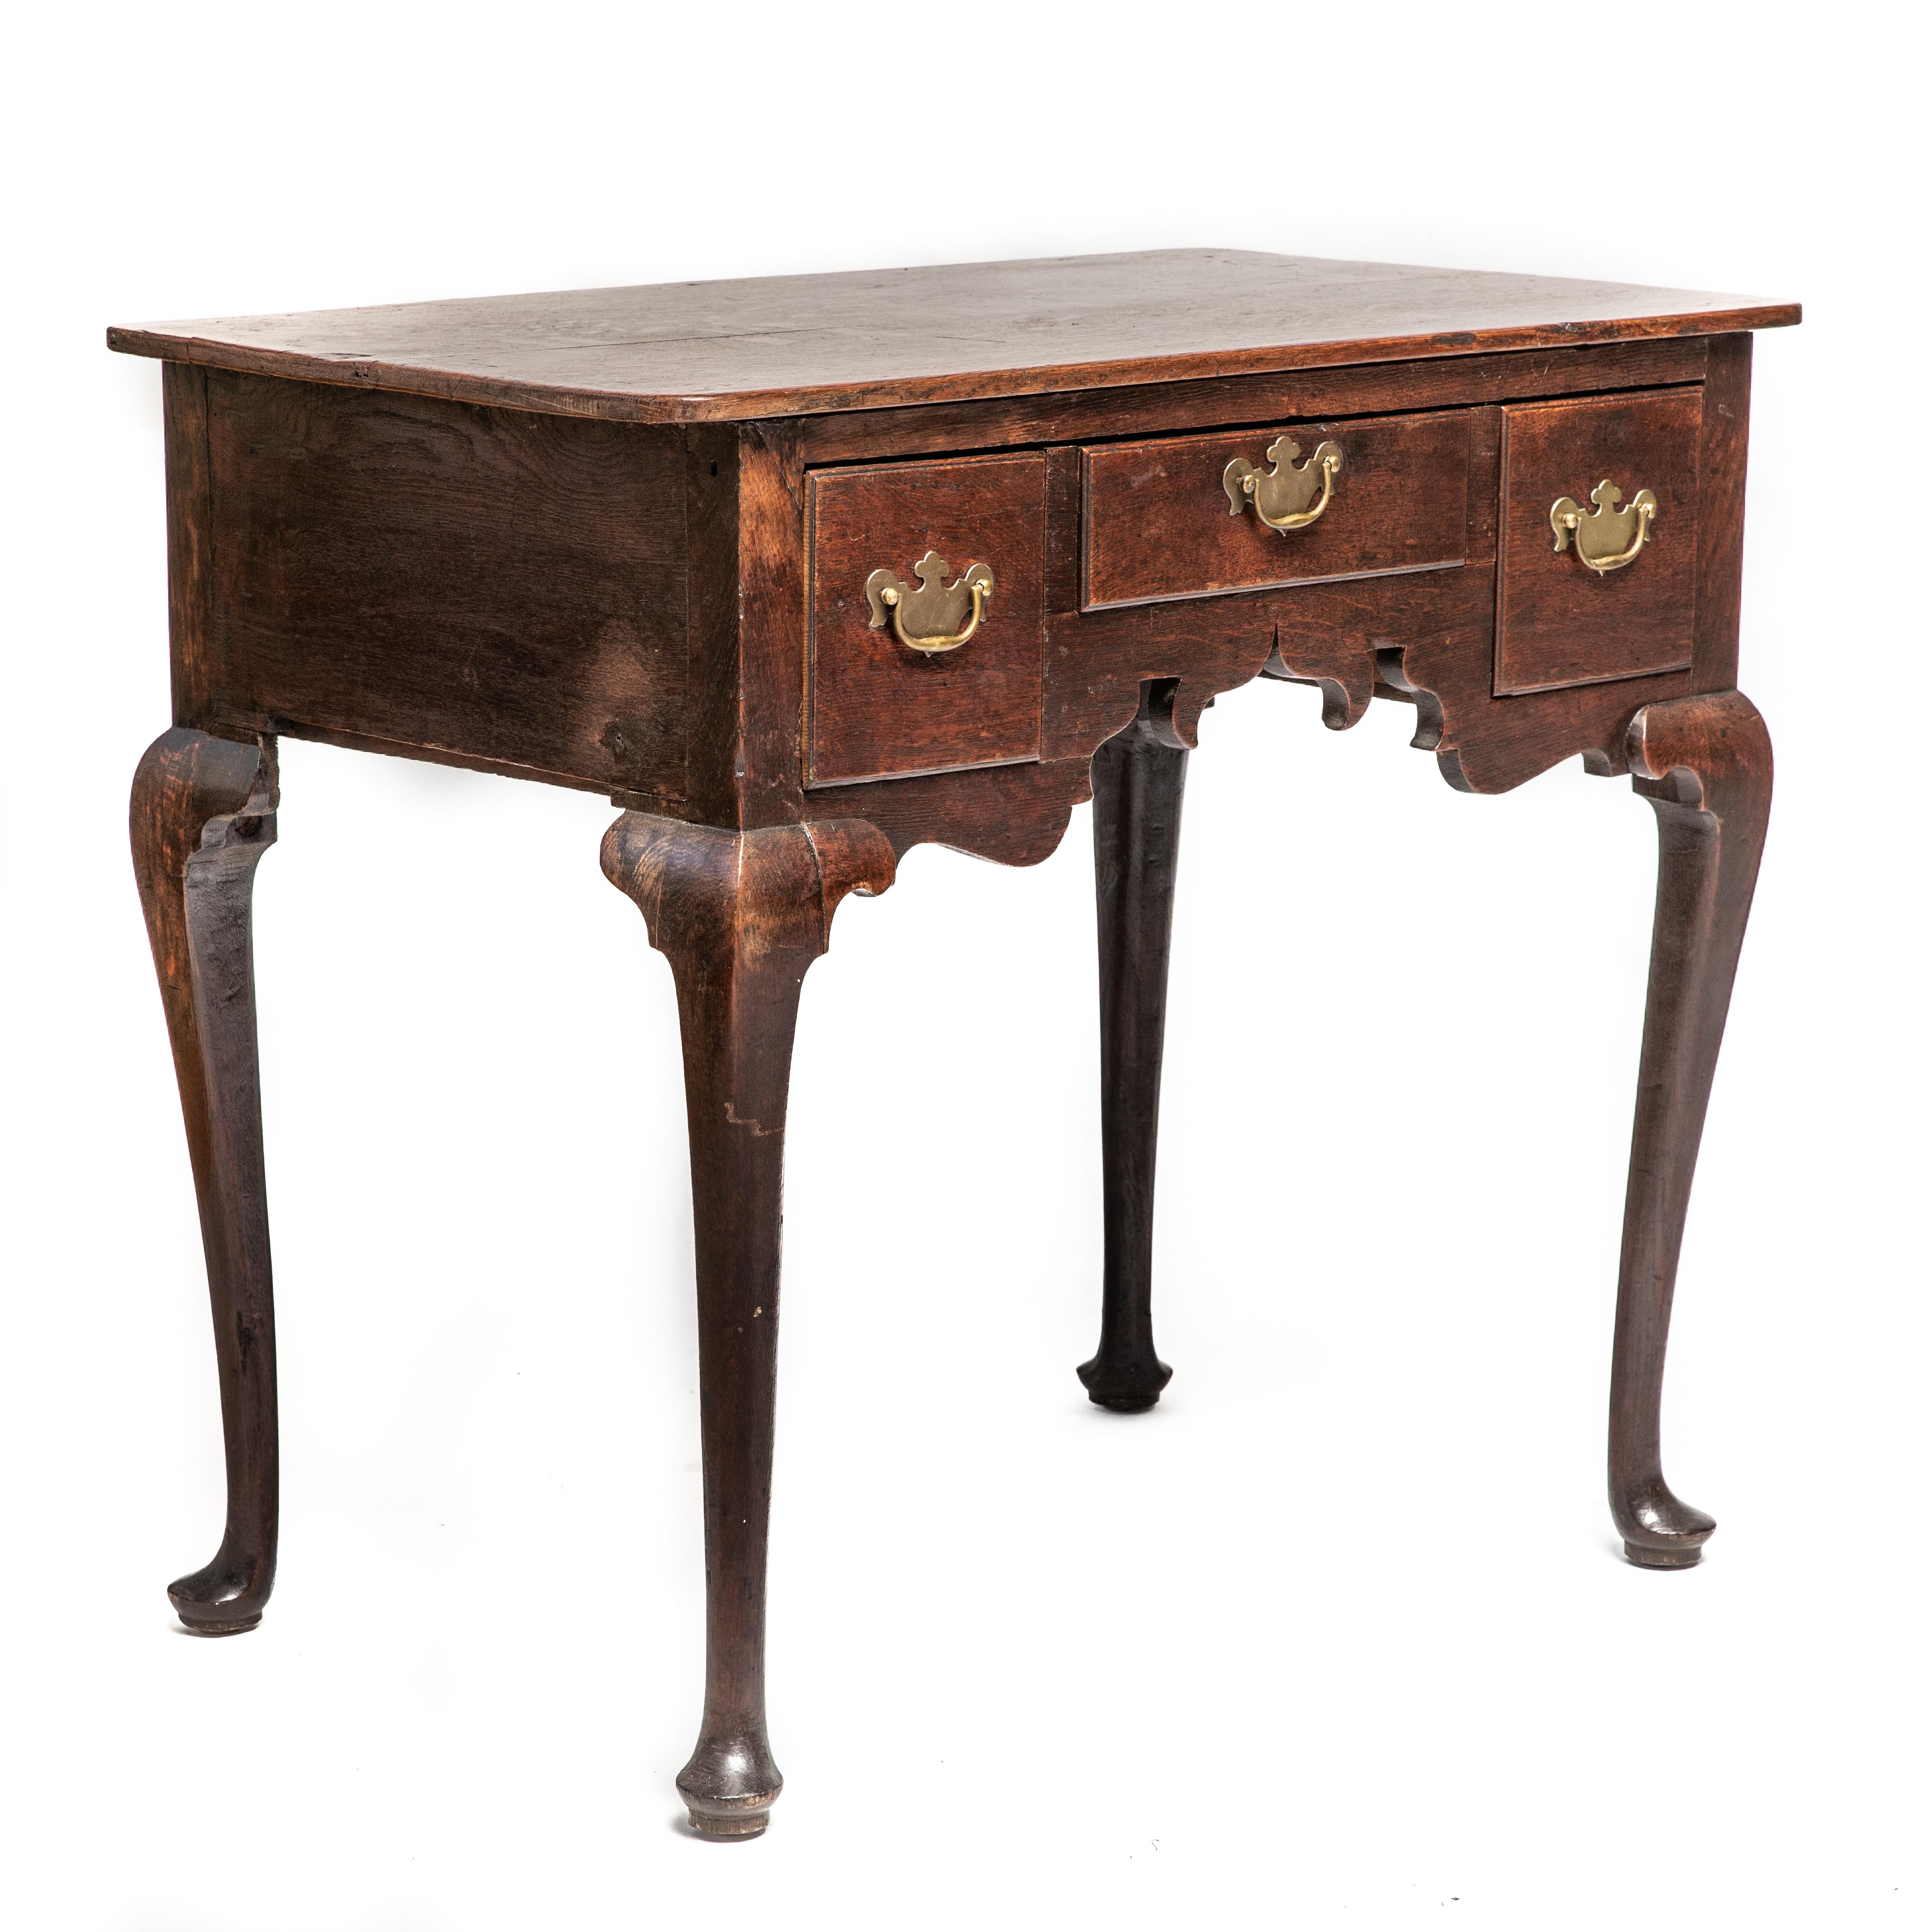 18th century George II oak dressing table with drawers raised on cabriole legs. Measures: 28